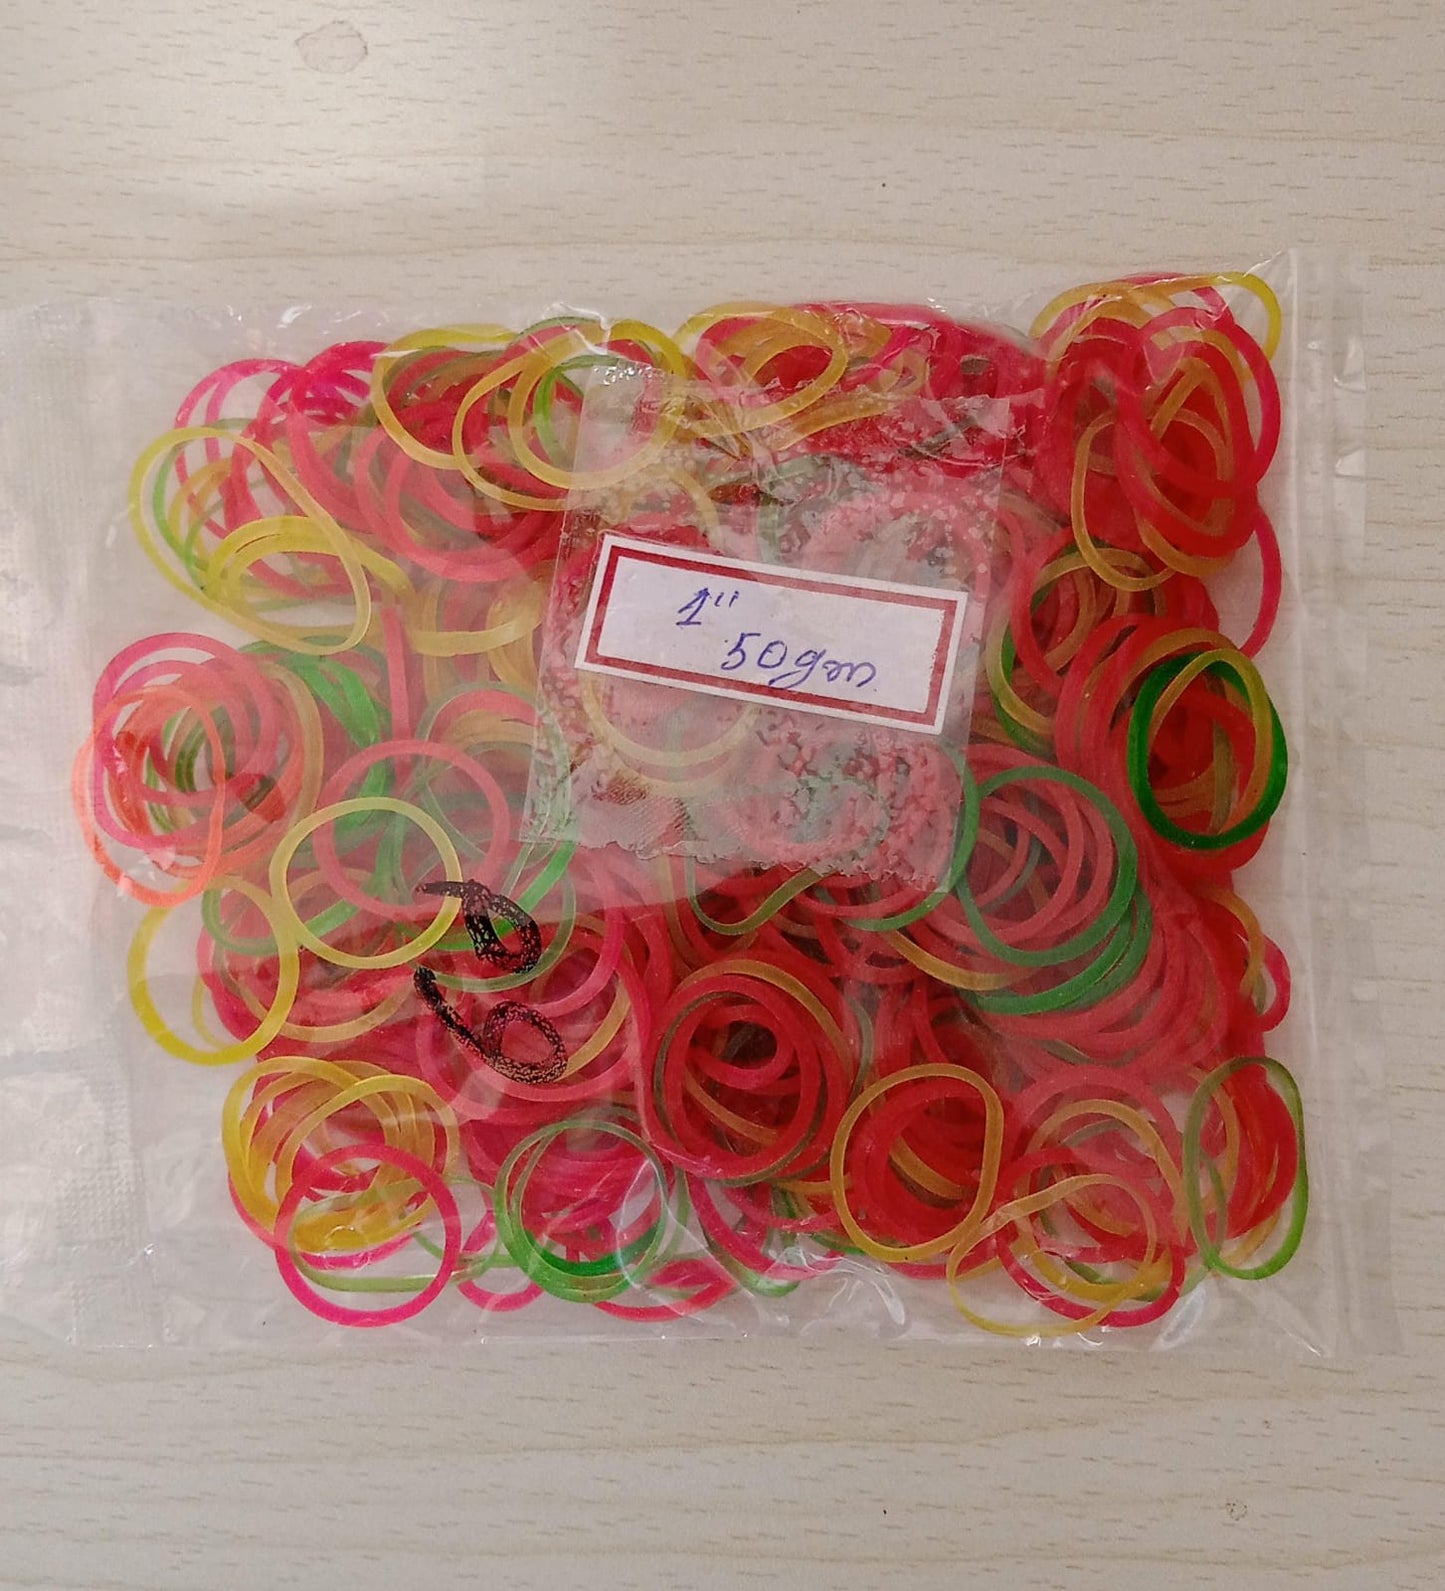 4357 Rubber Band For Office/Home and Kitchen Accessories Item Products, Elastic Rubber Bands, Flexible Reusable Nylon Elastic Unbreakable, For Stationery, School  Multicolor (1 Inch, 50 GM)